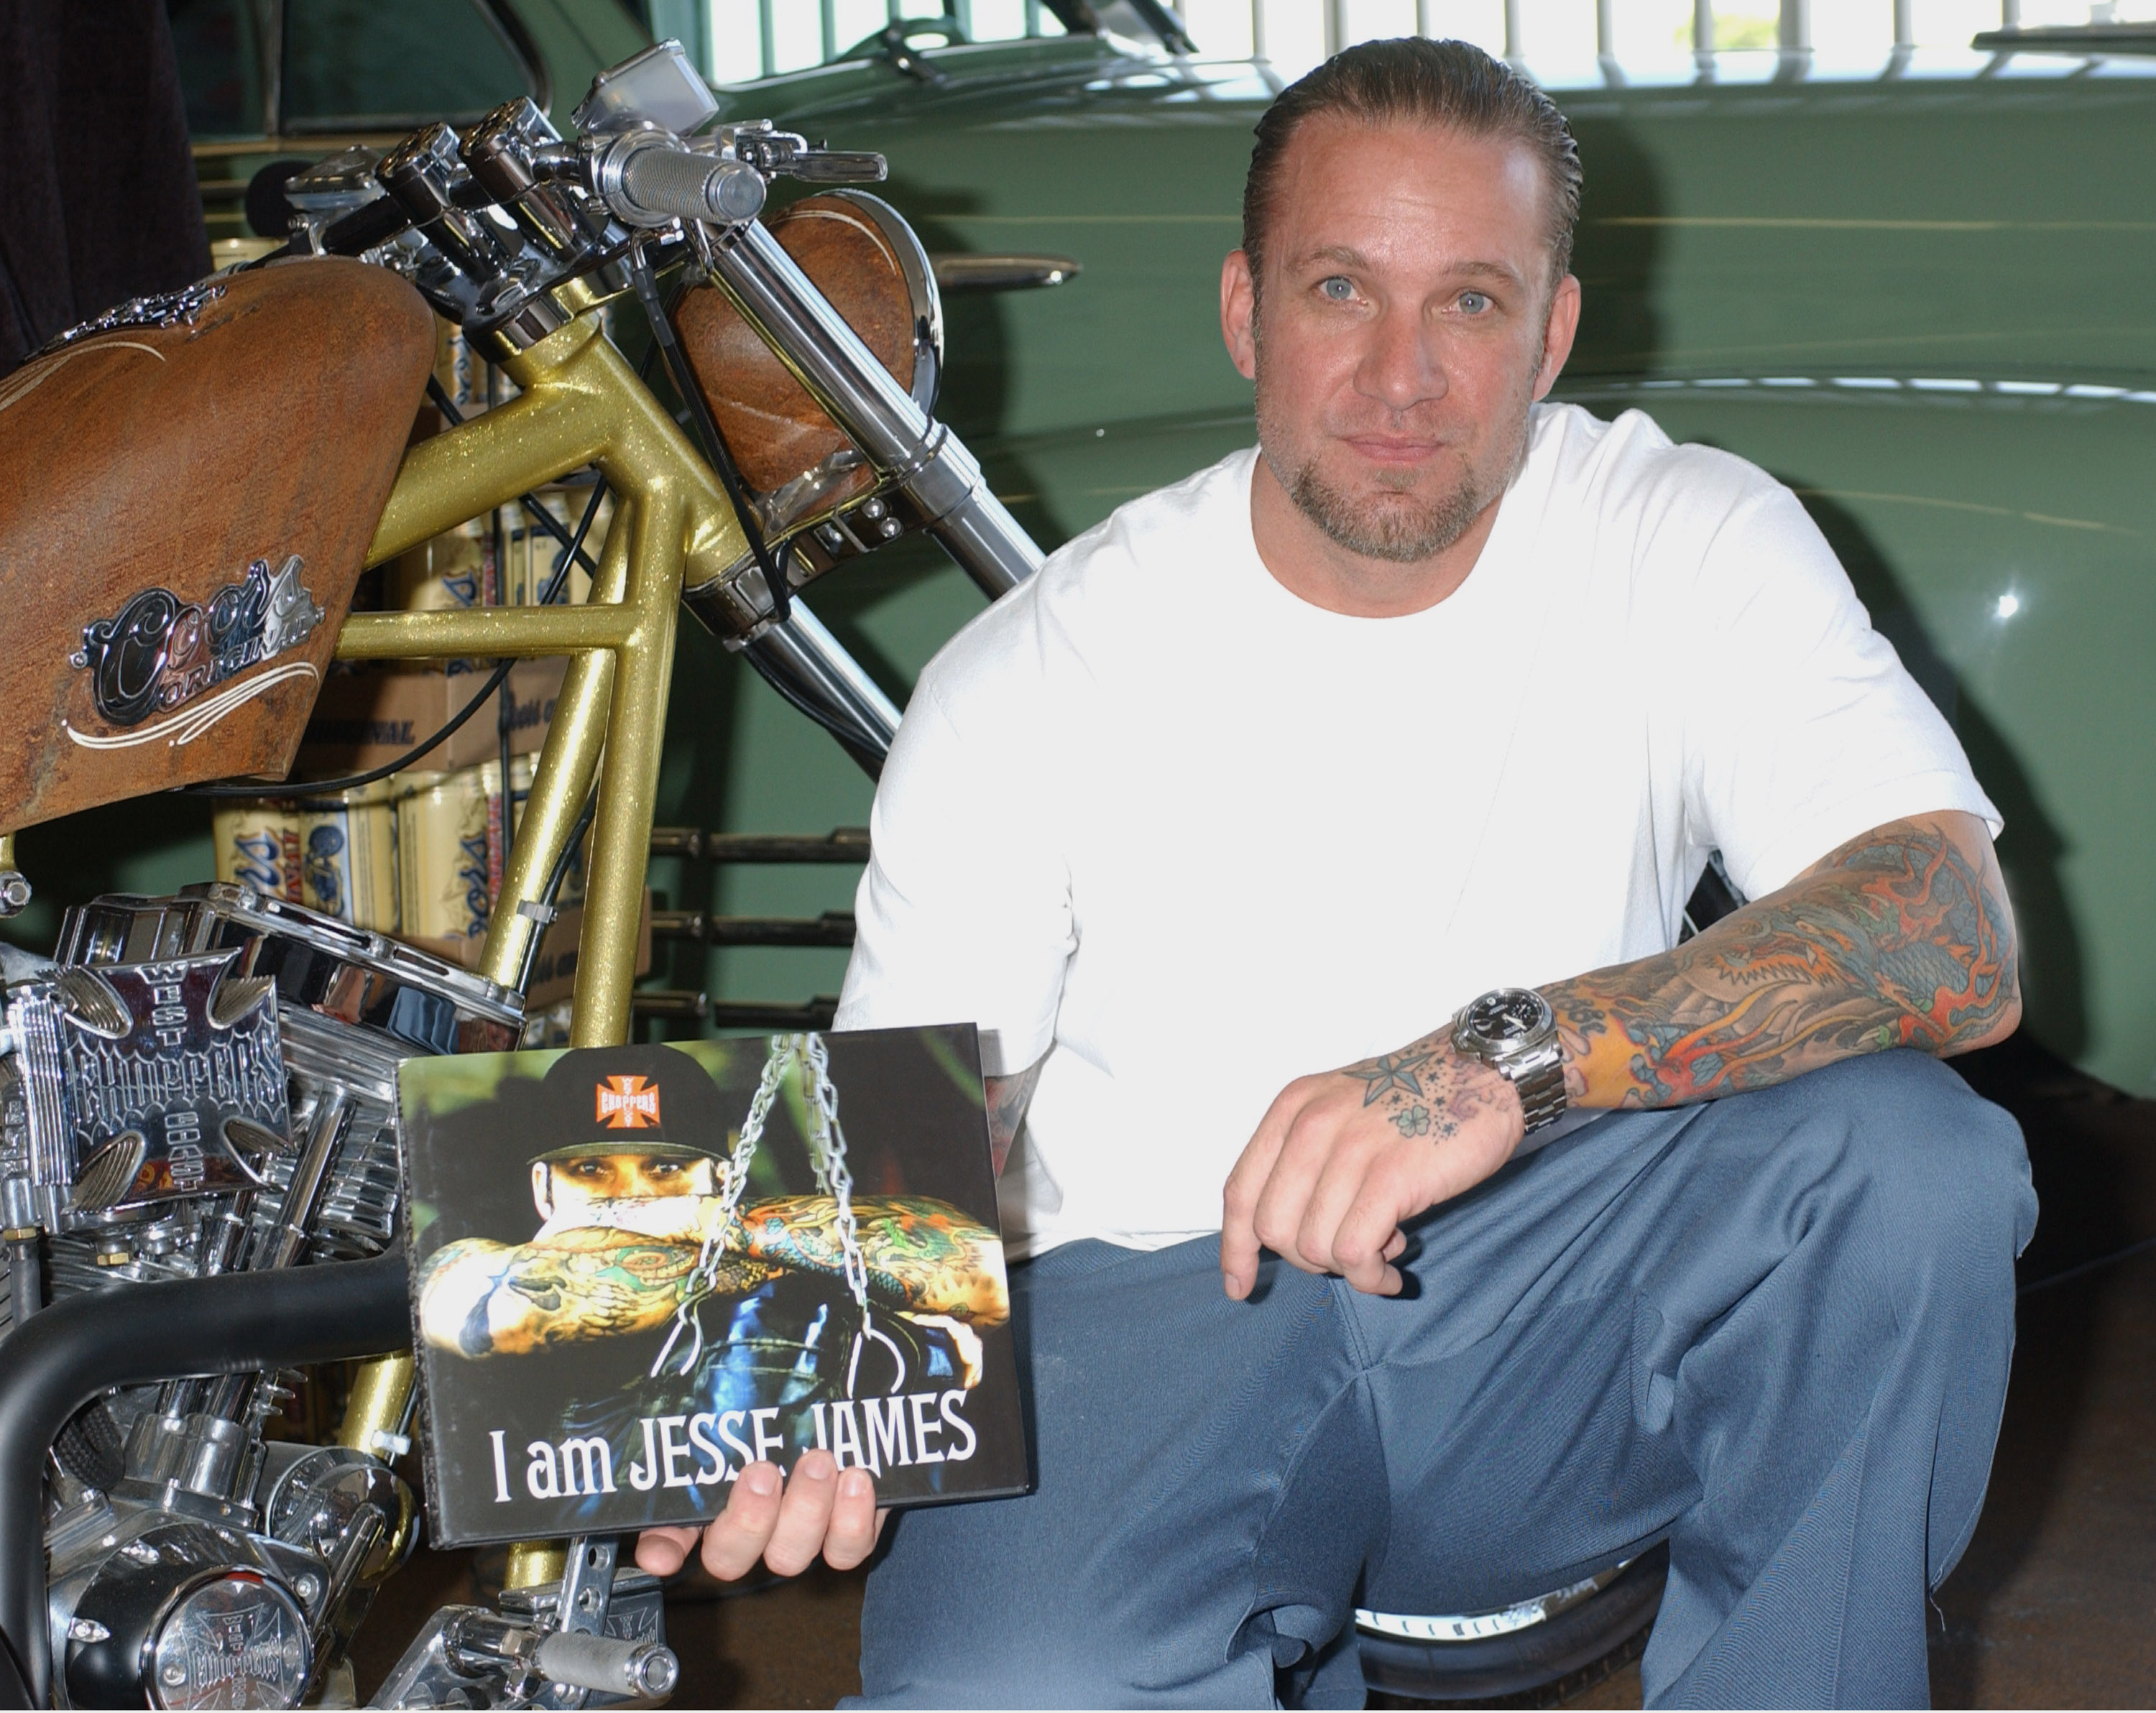 Jesse James at his "I Am Jesse James" book signing in Long Beach, California on May 7, 2004 | Source: Getty Images